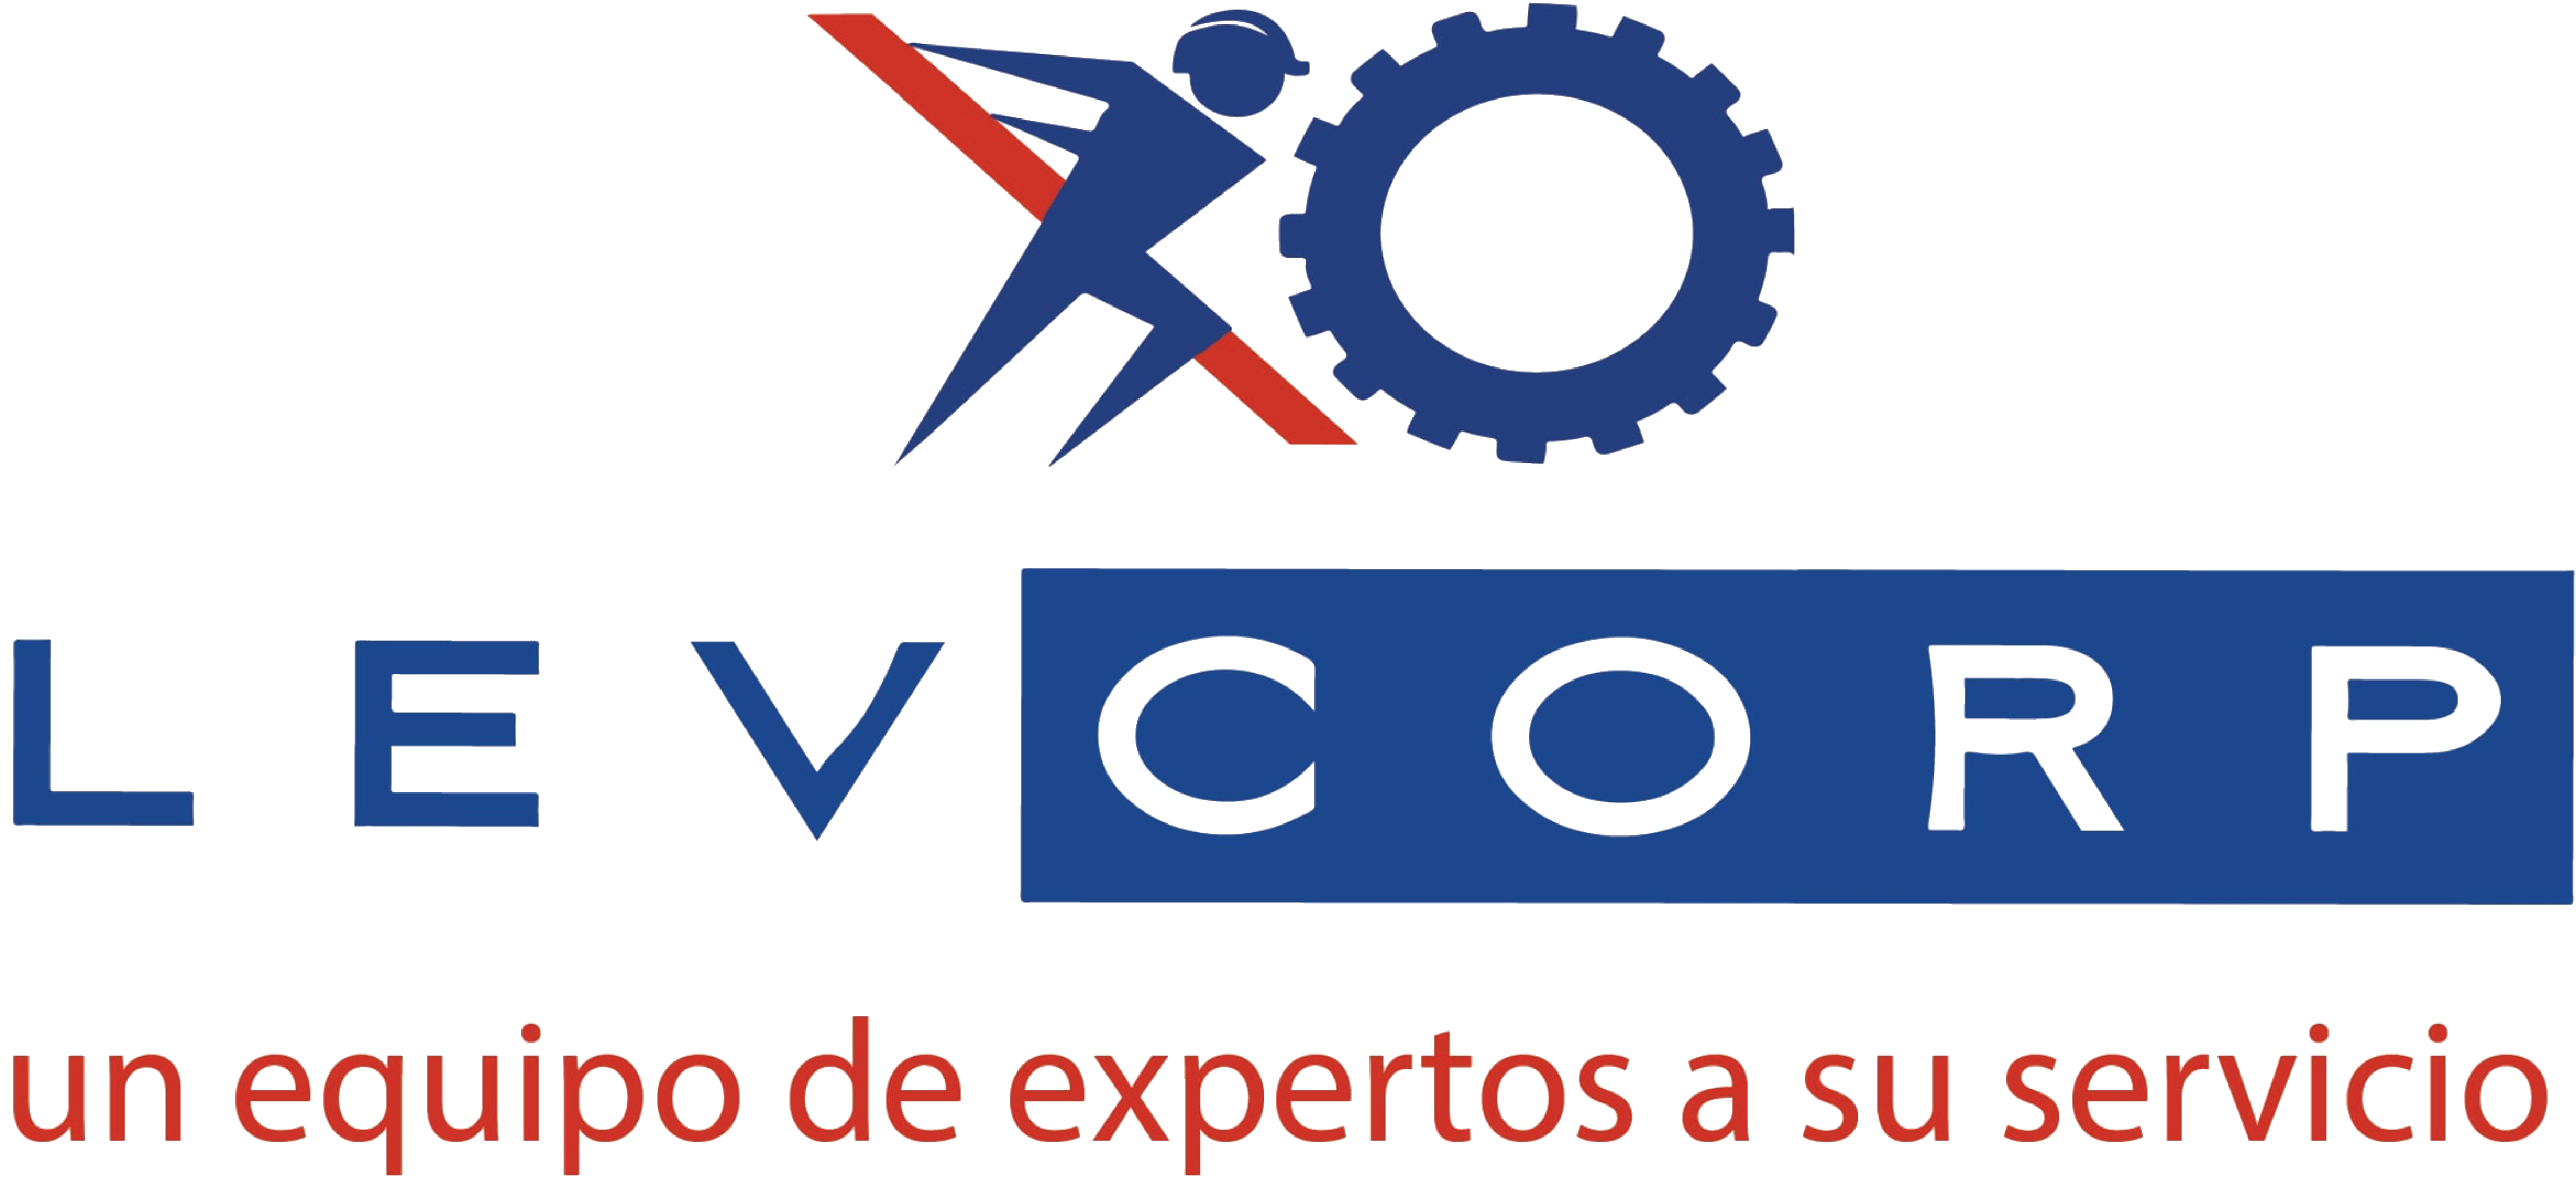 Levcorp S.A.